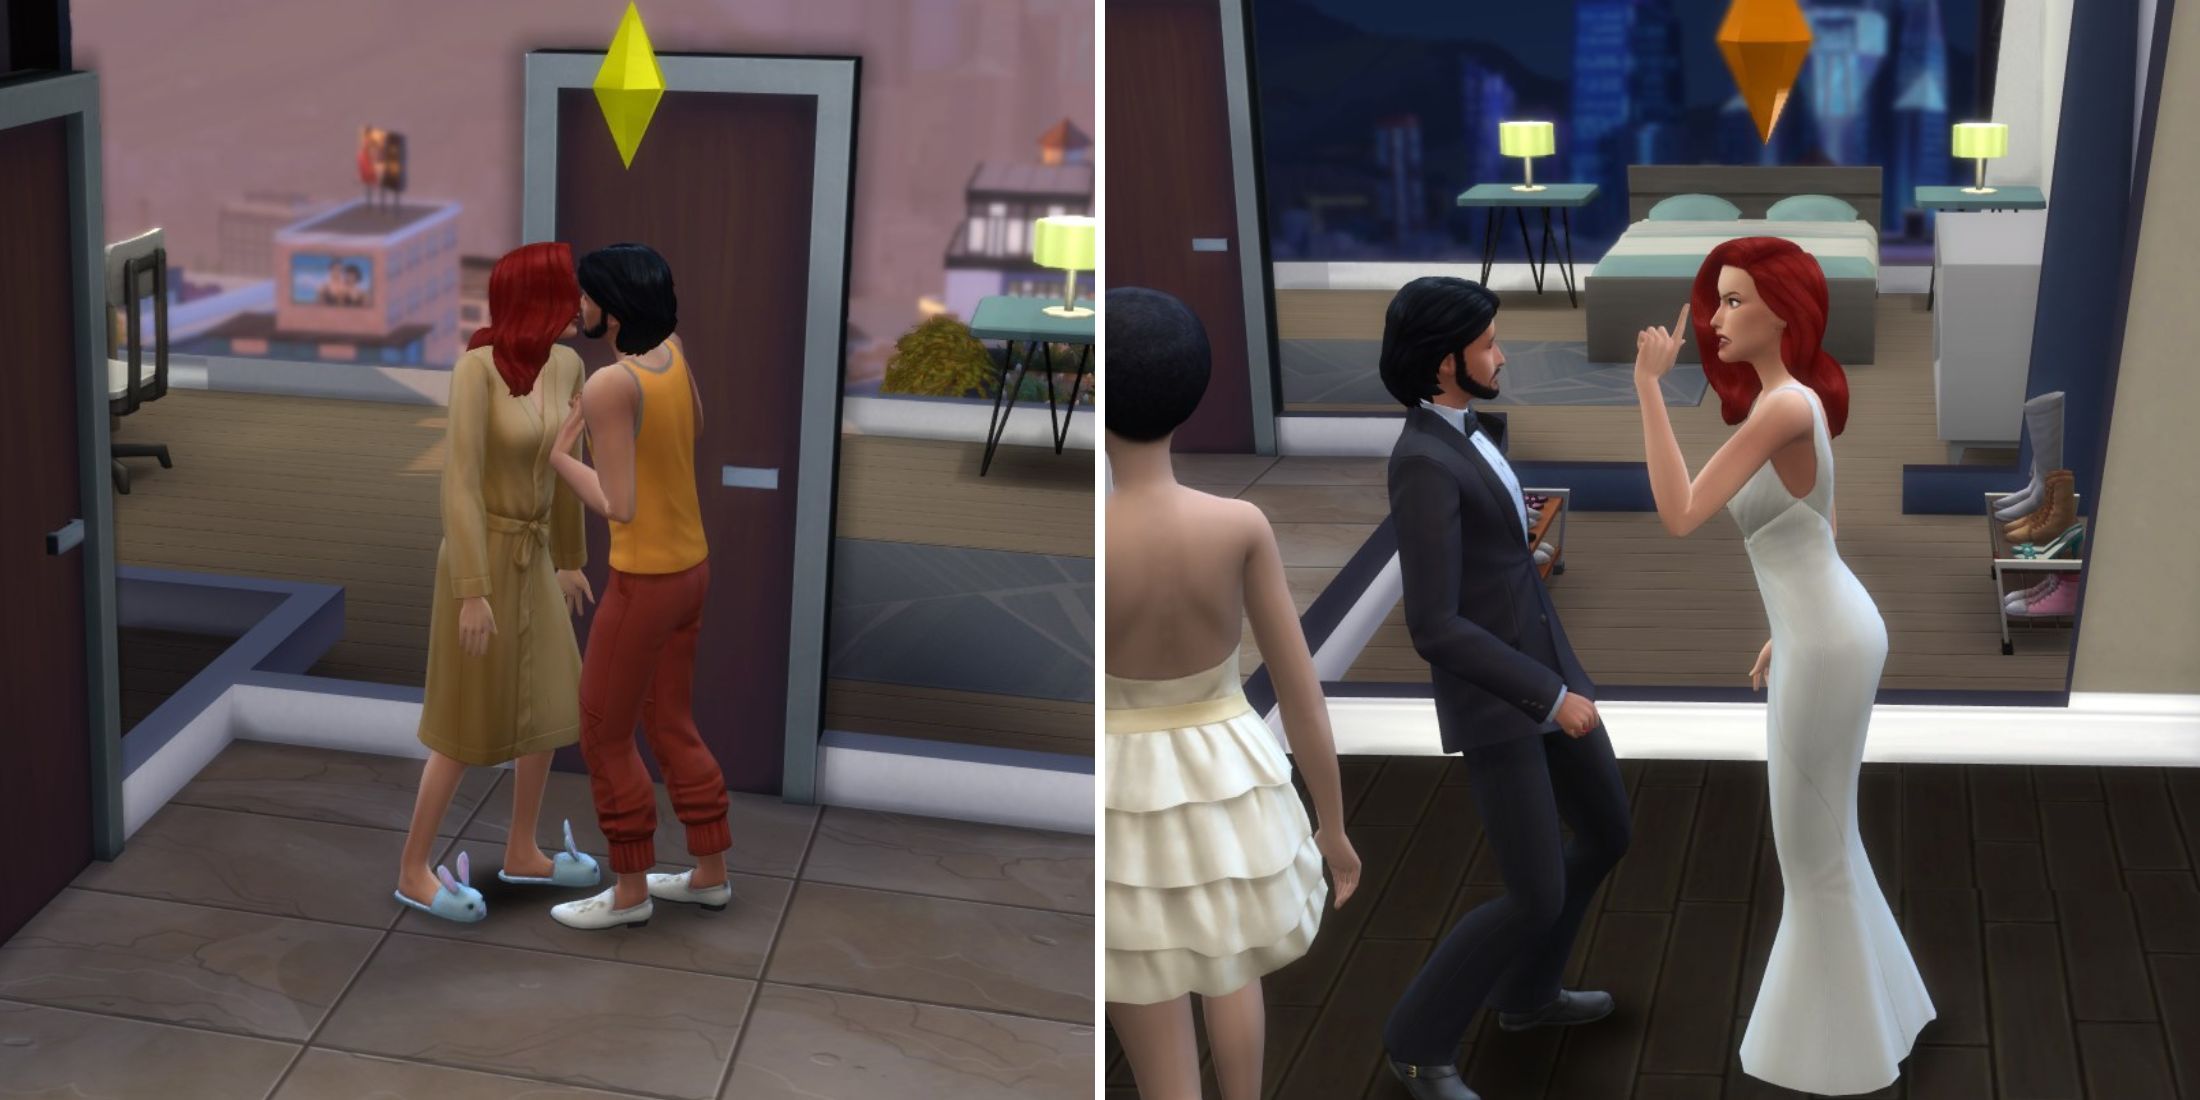 The Sims 4 character is calling off the wedding mid ceremony to fulfill the Engaged In Conflict scenario.